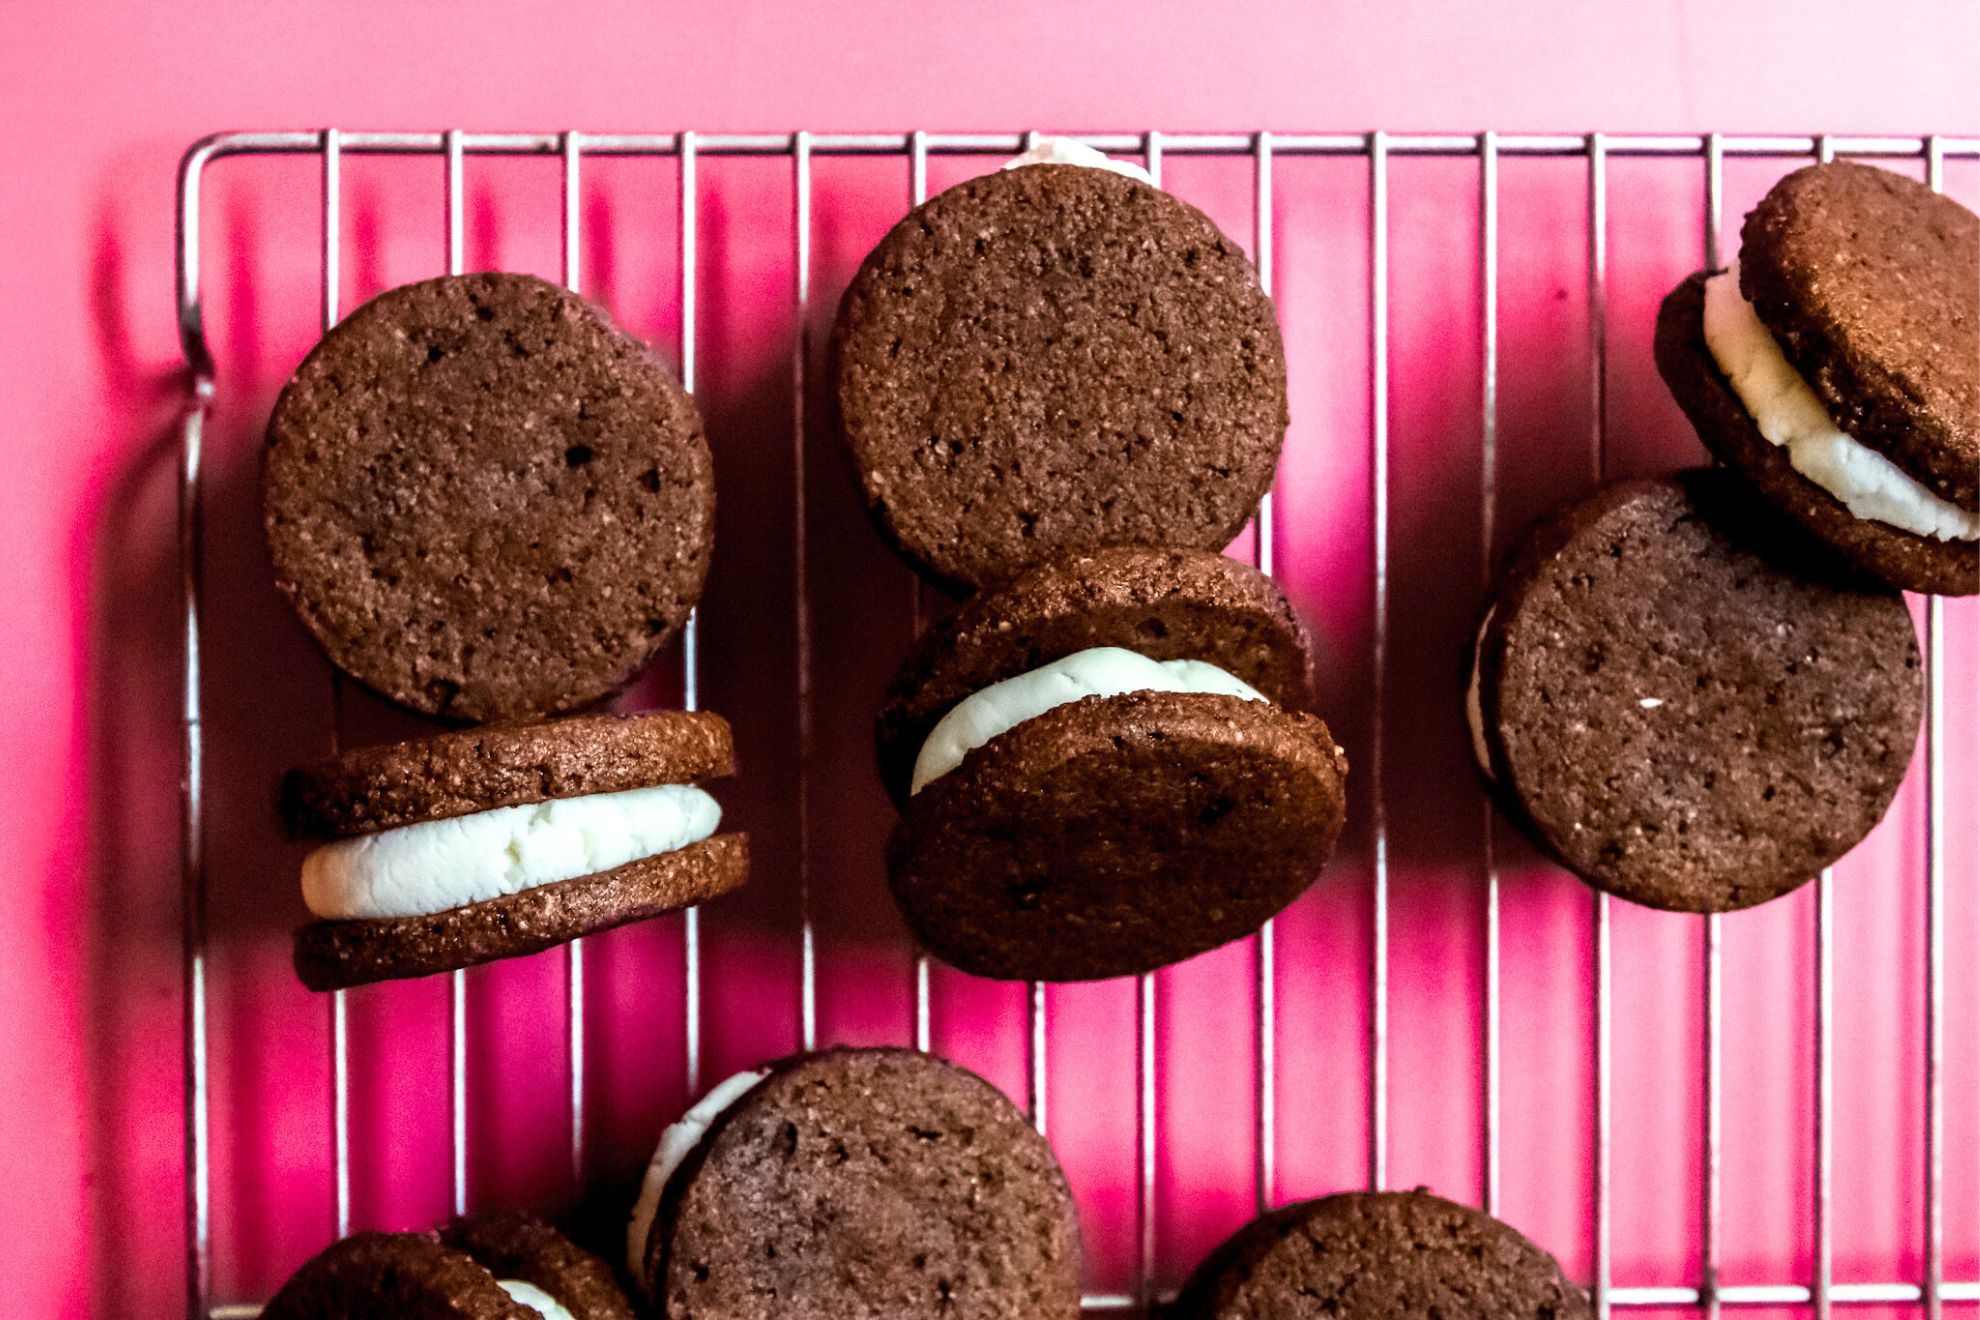 This is an overhead horizontal image of a silver cooling rack on a dark pink surface. On the cooling rack are chocolate sandwich cookies with vanilla icing in the middle. Some sandwich cookies are flat and some are leaning on their sides to reveal their layers.